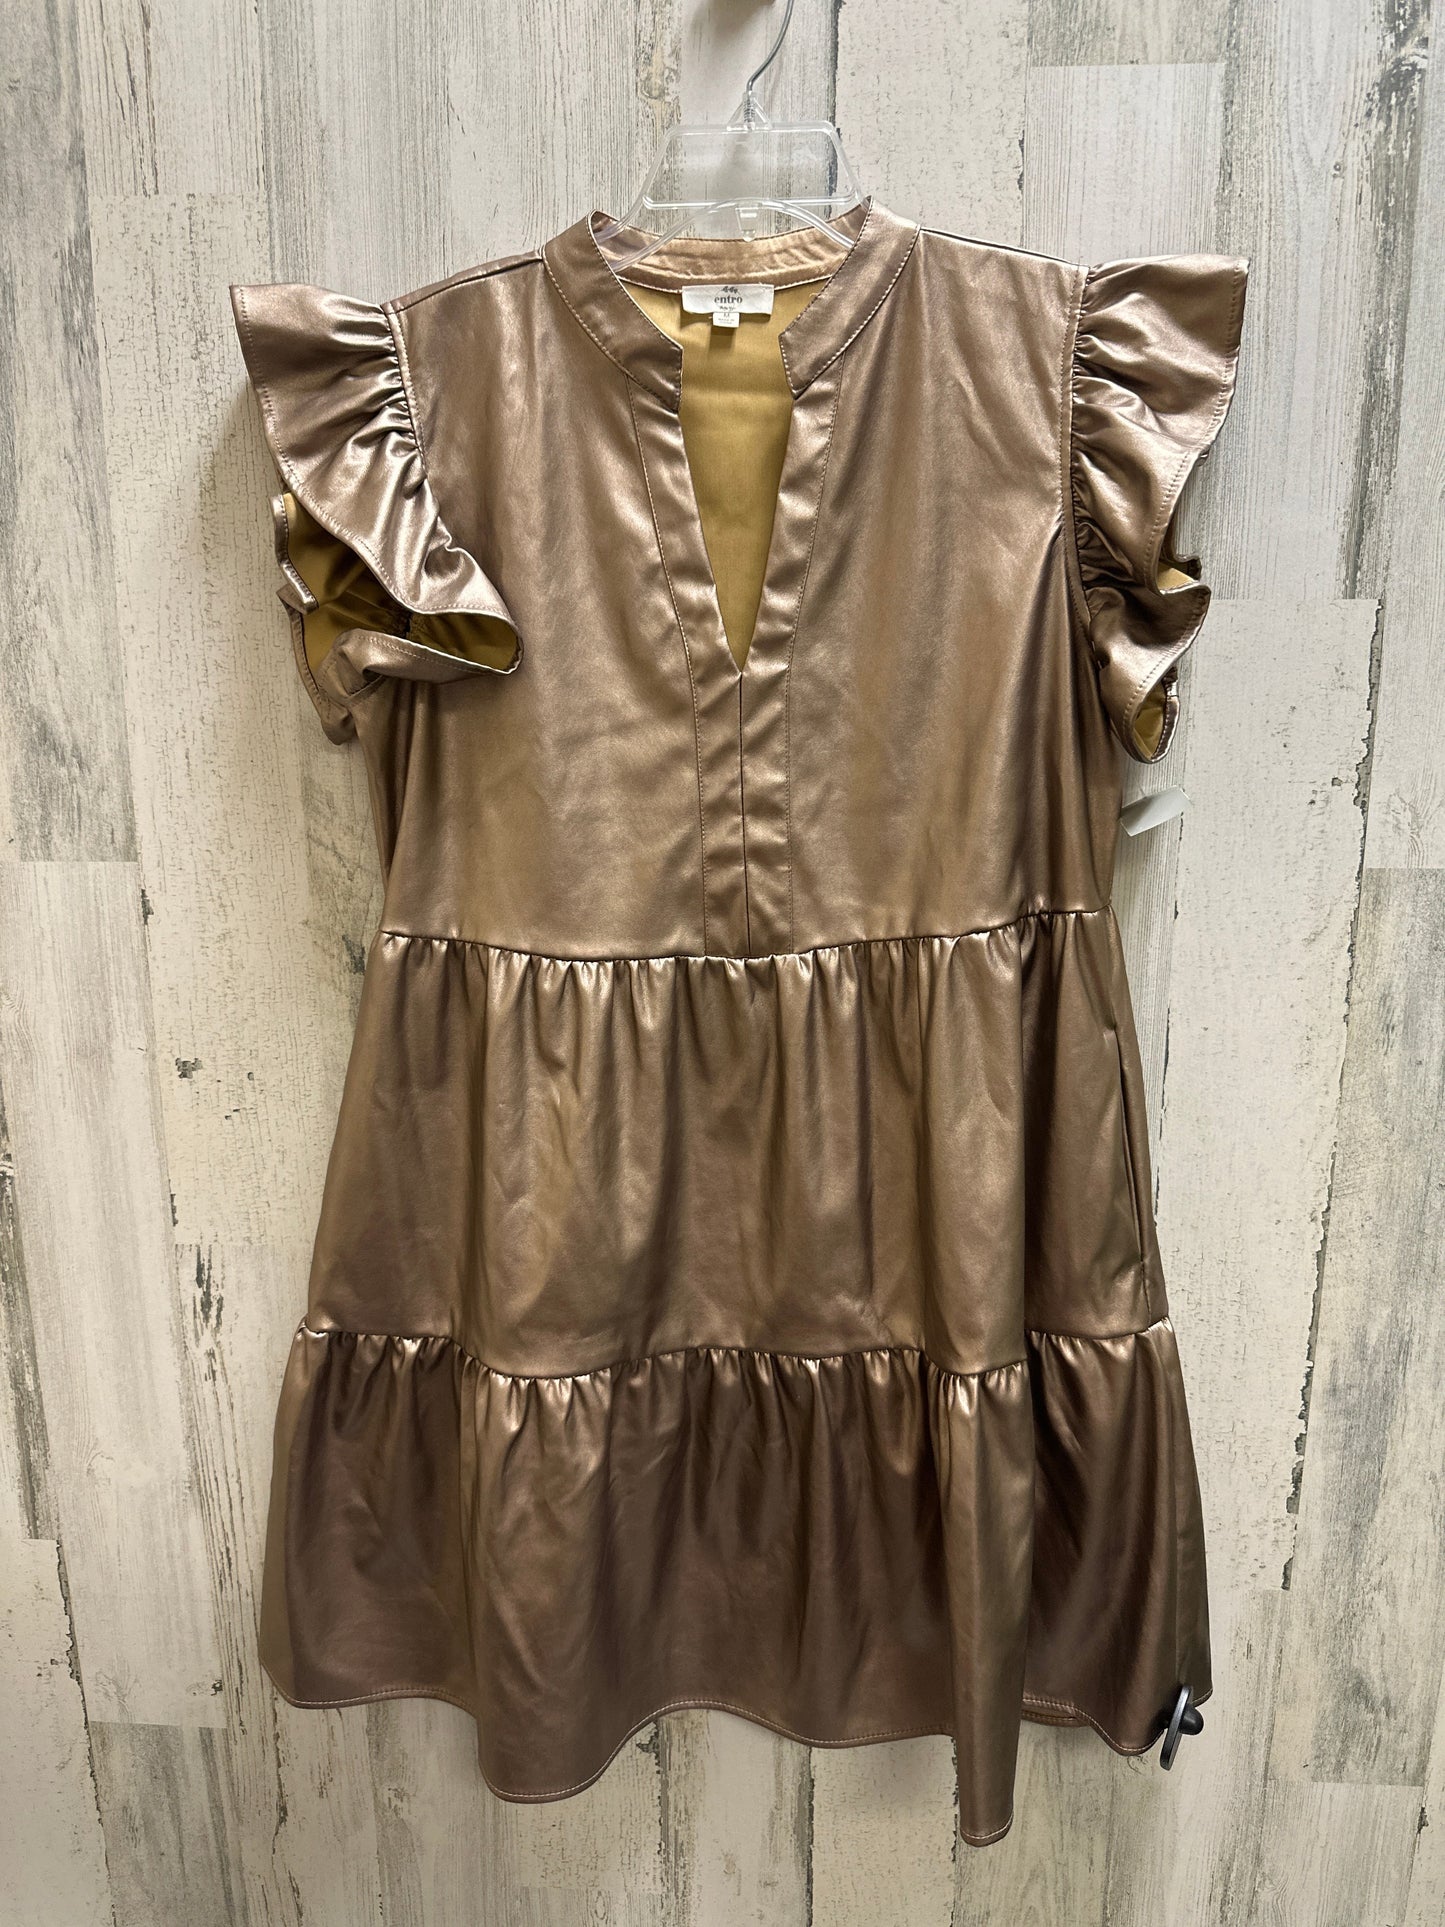 Rose Gold Dress Casual Short Entro, Size M